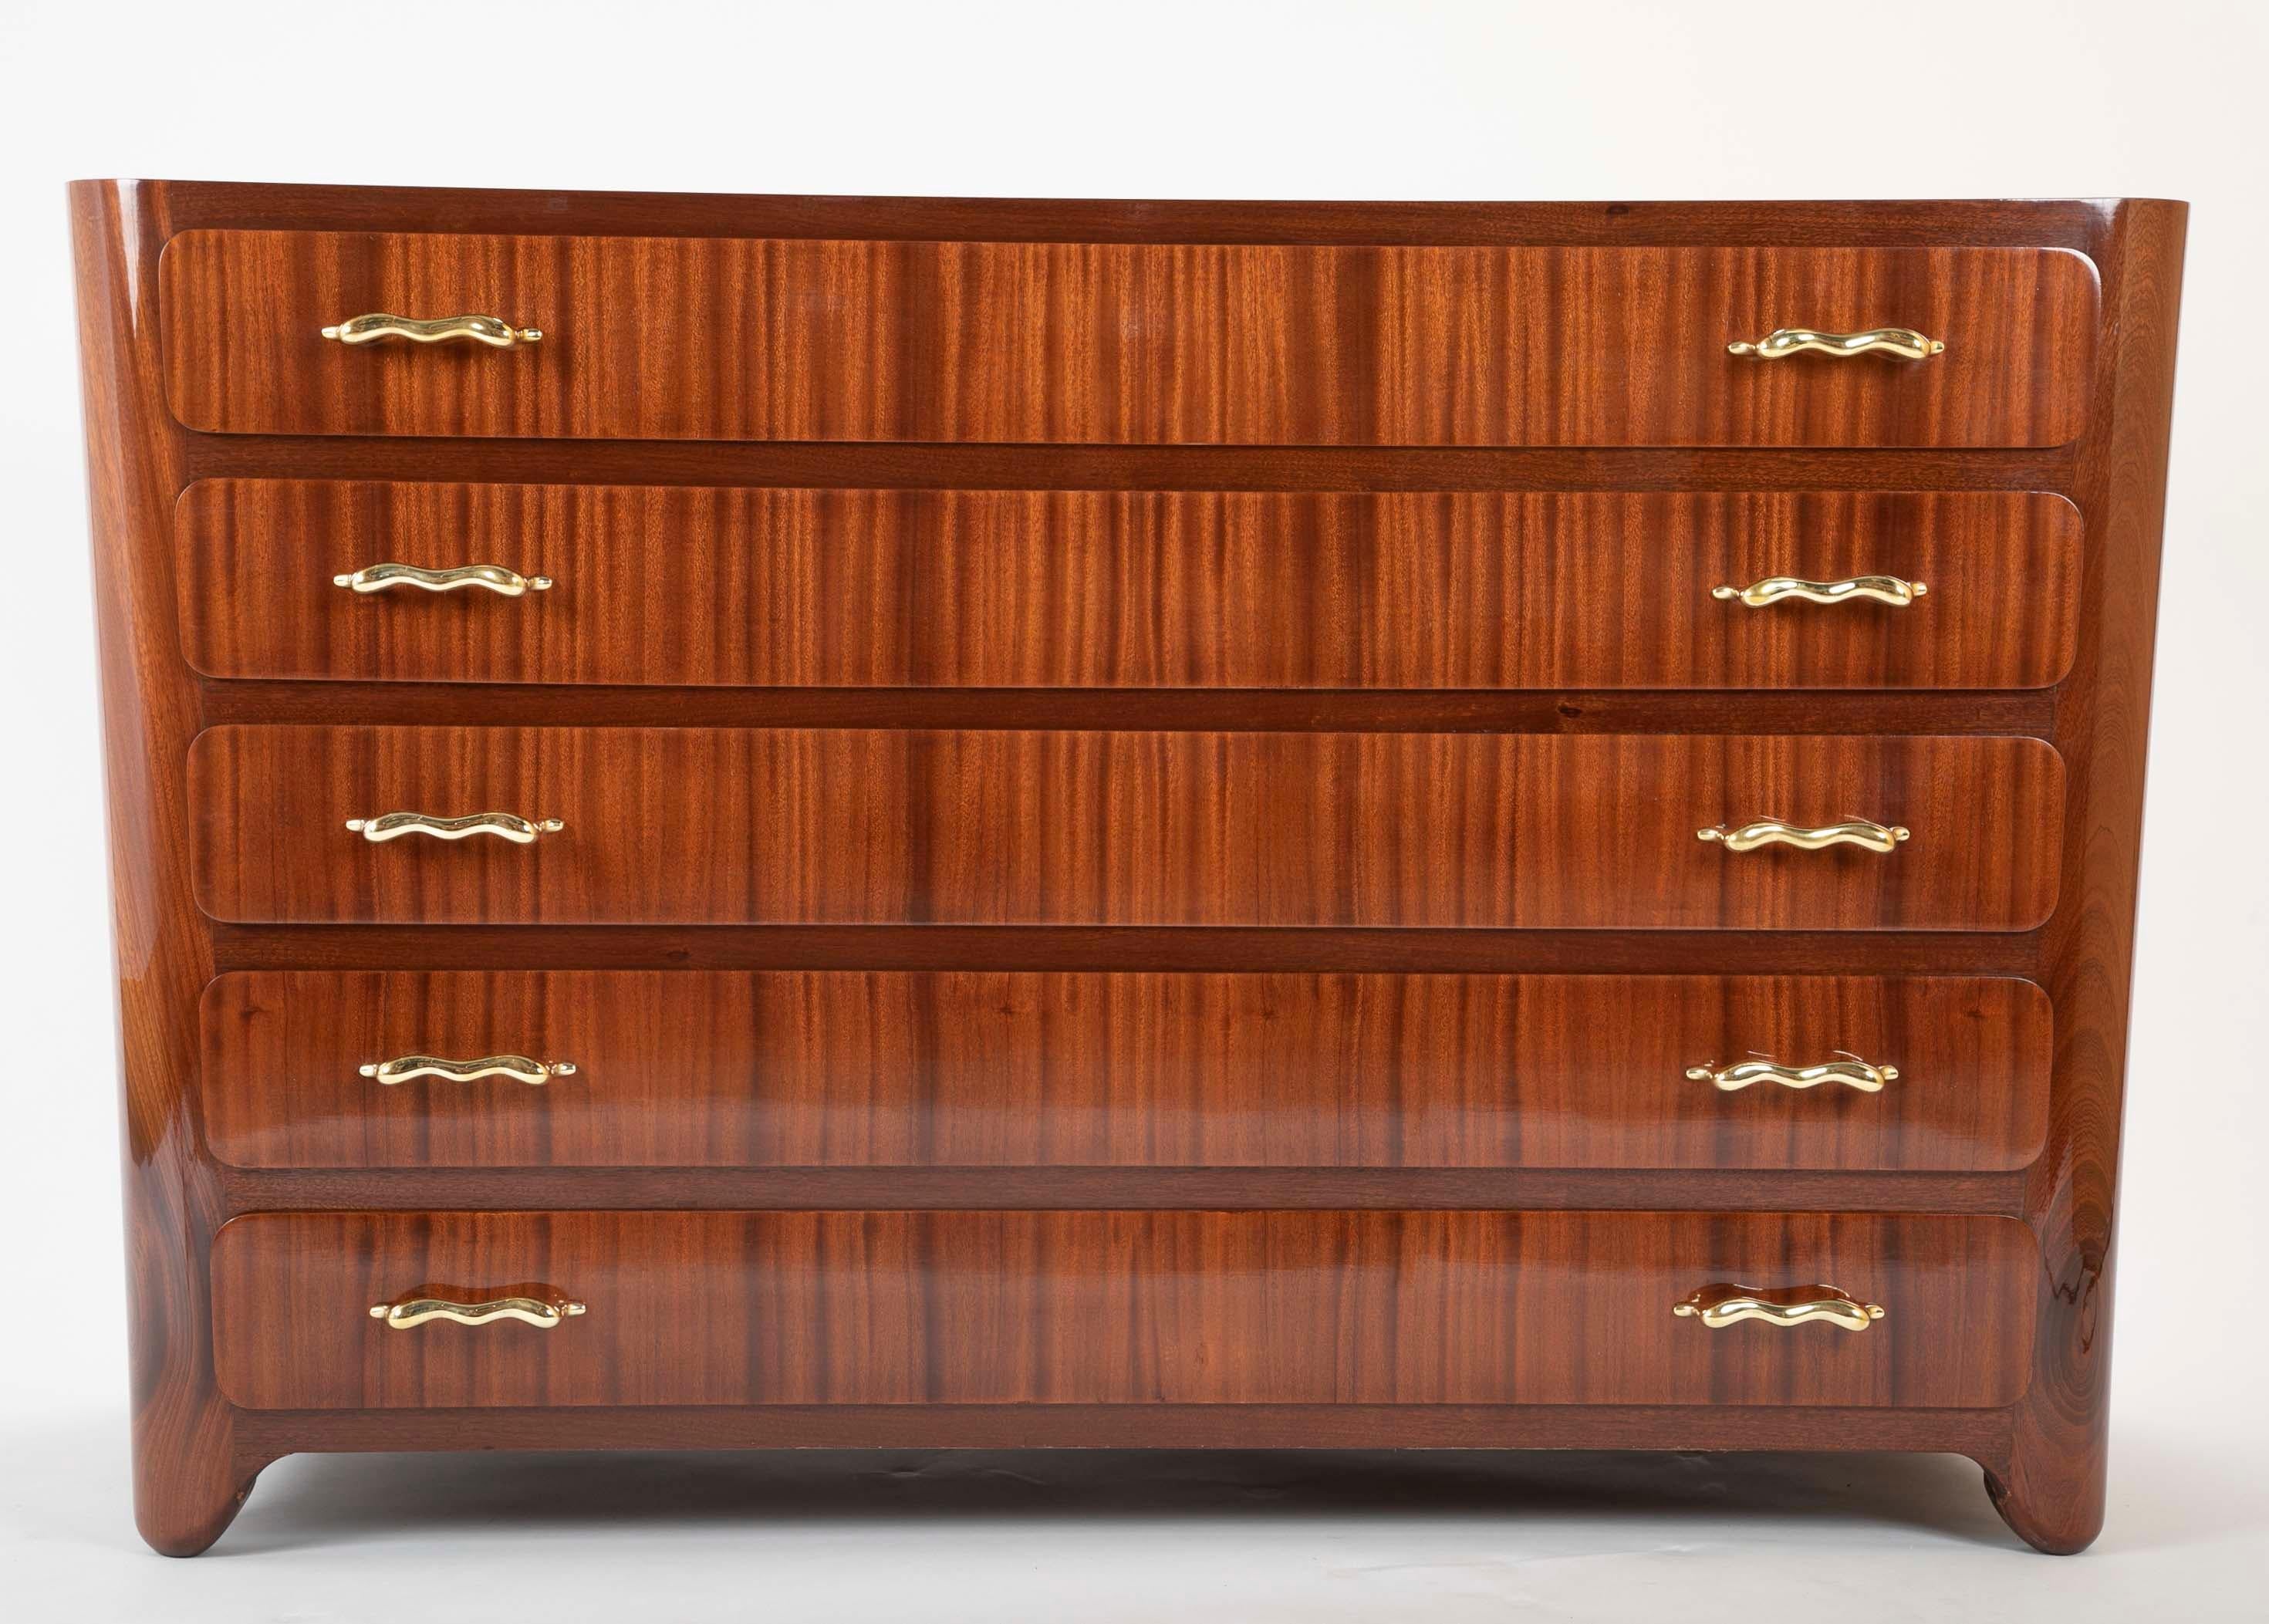 A first quality book matched Sapele mahogany chest designed by Guglielmo Ulrich, circa 1935. The sides of the chest have matched veneers that exsentuate the downward tapering of the both the carcas and the handles.
Similar examples can be seen in